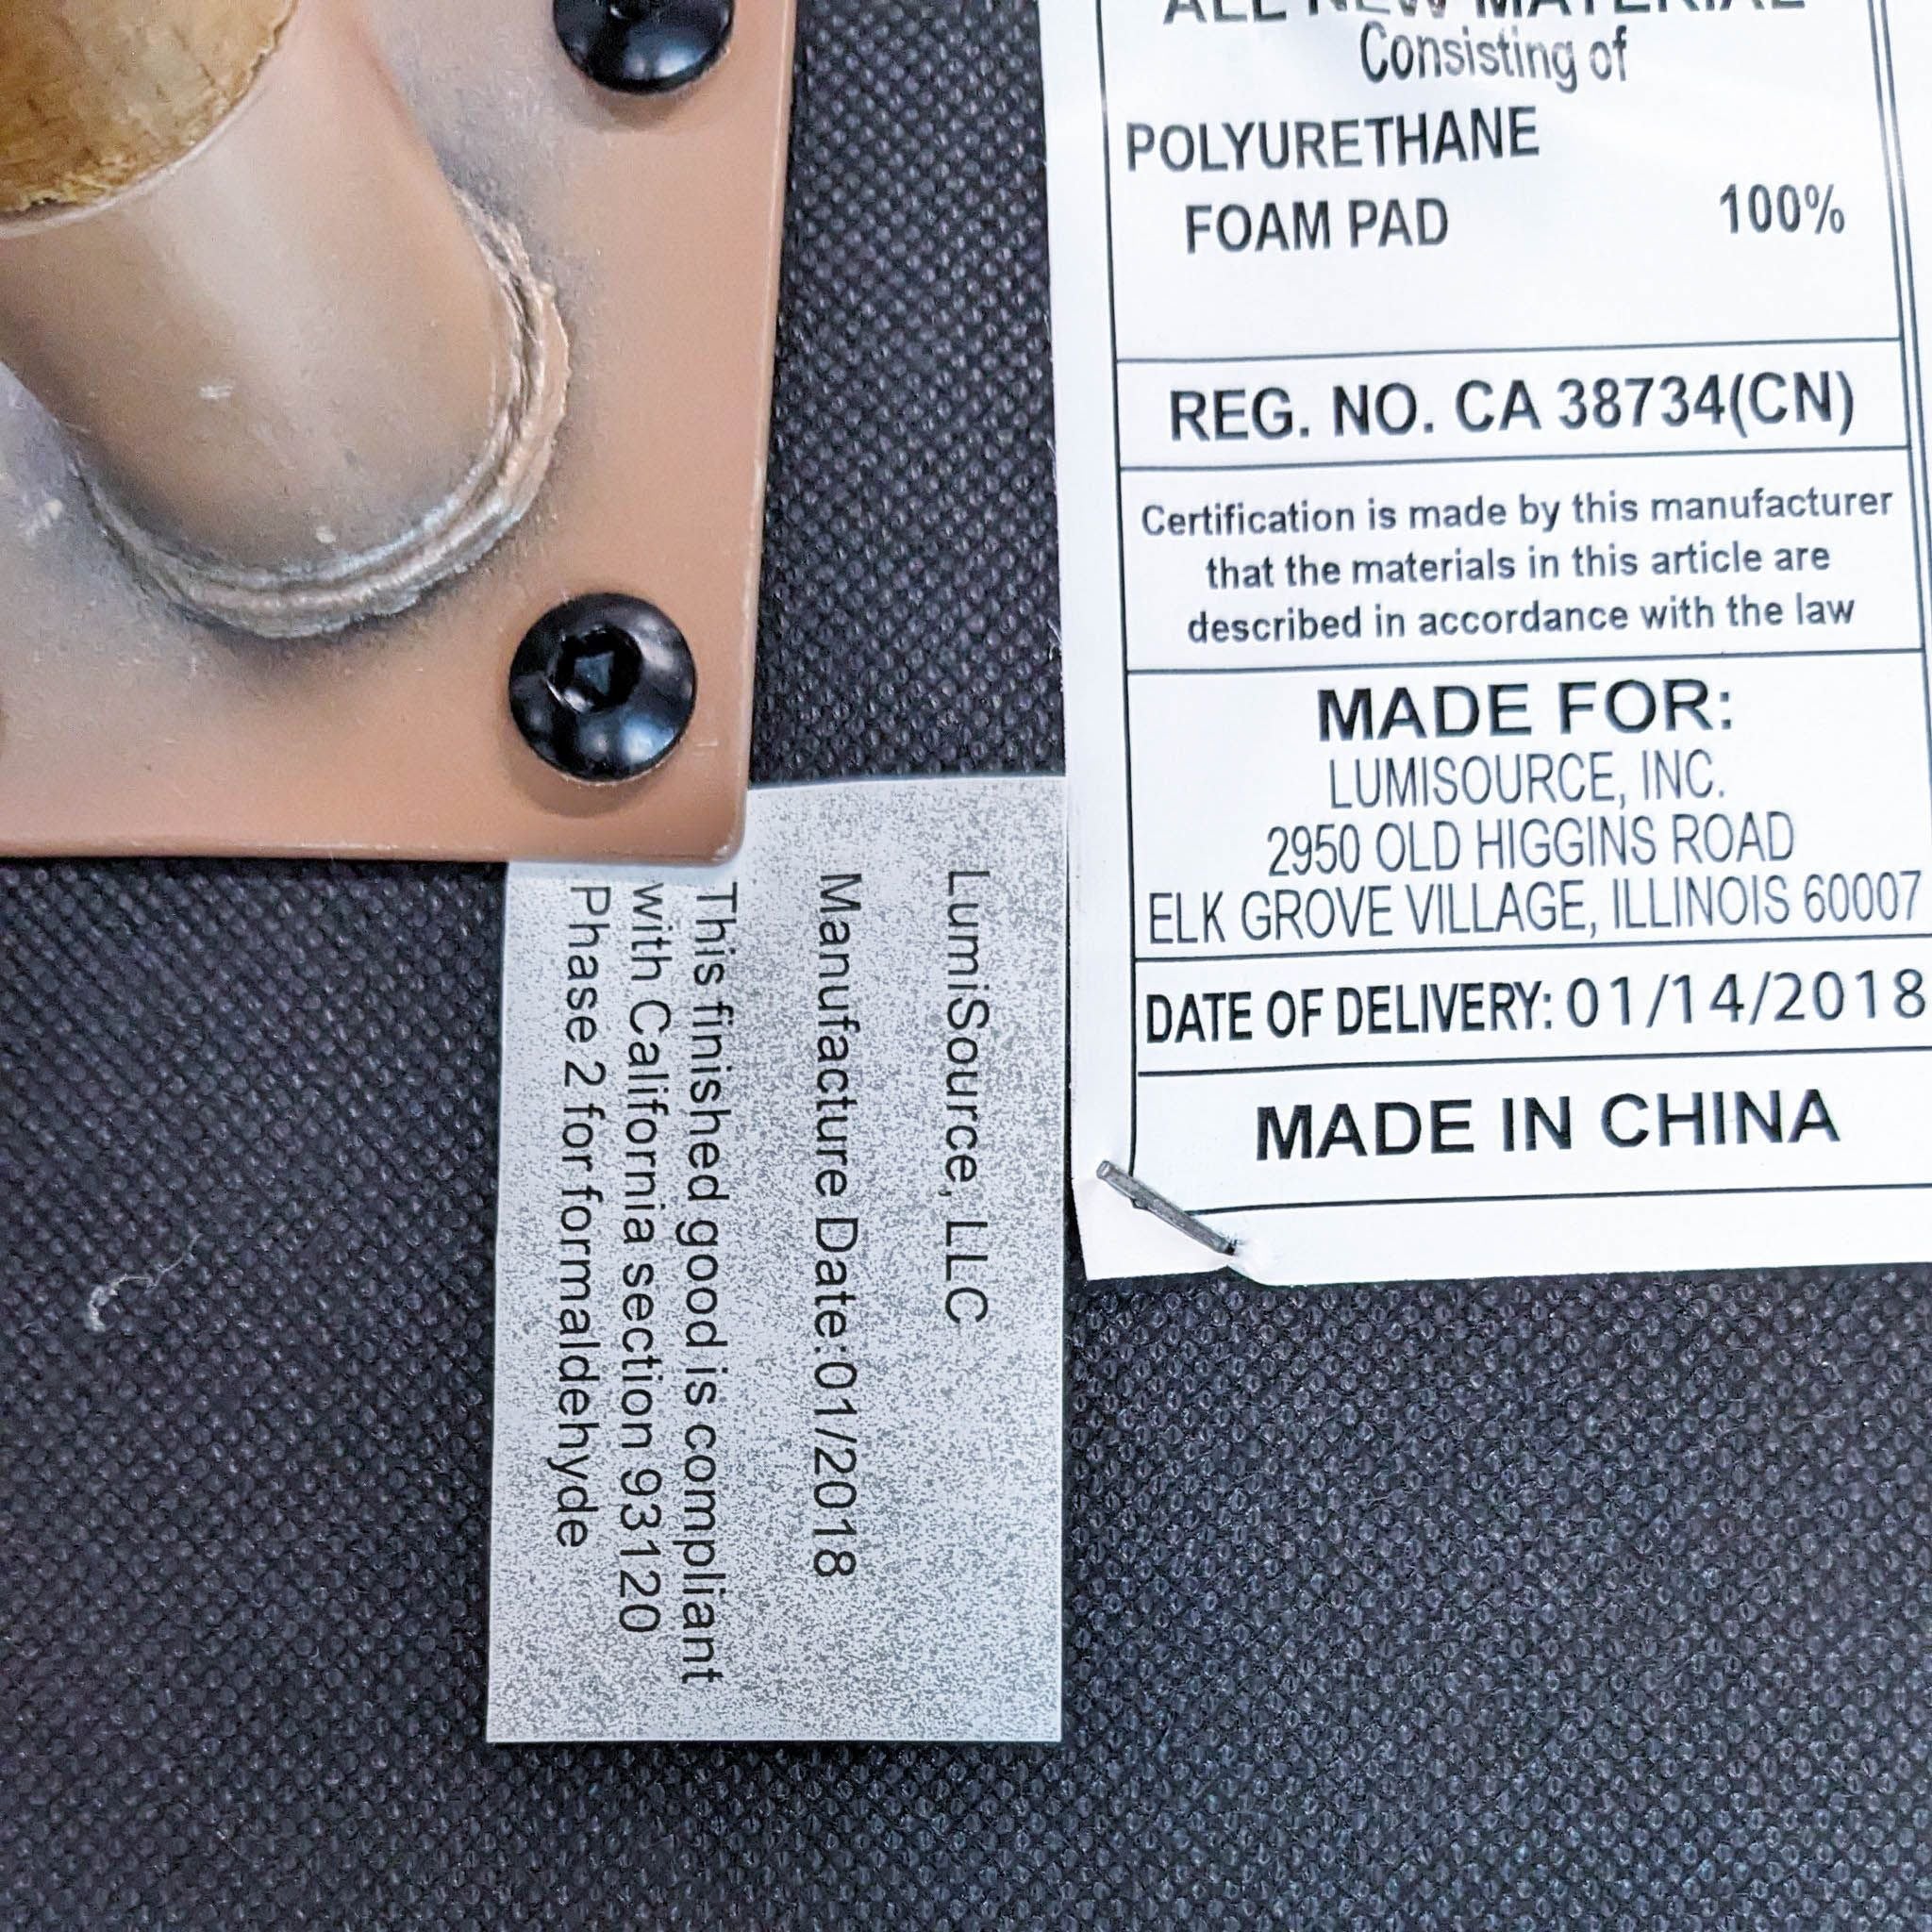 Alt text 2: Close-up of a manufacturing label on a Vintage Flair Chair by LumiSource indicating materials, compliance, and the production date along with the "Made in China" marking.